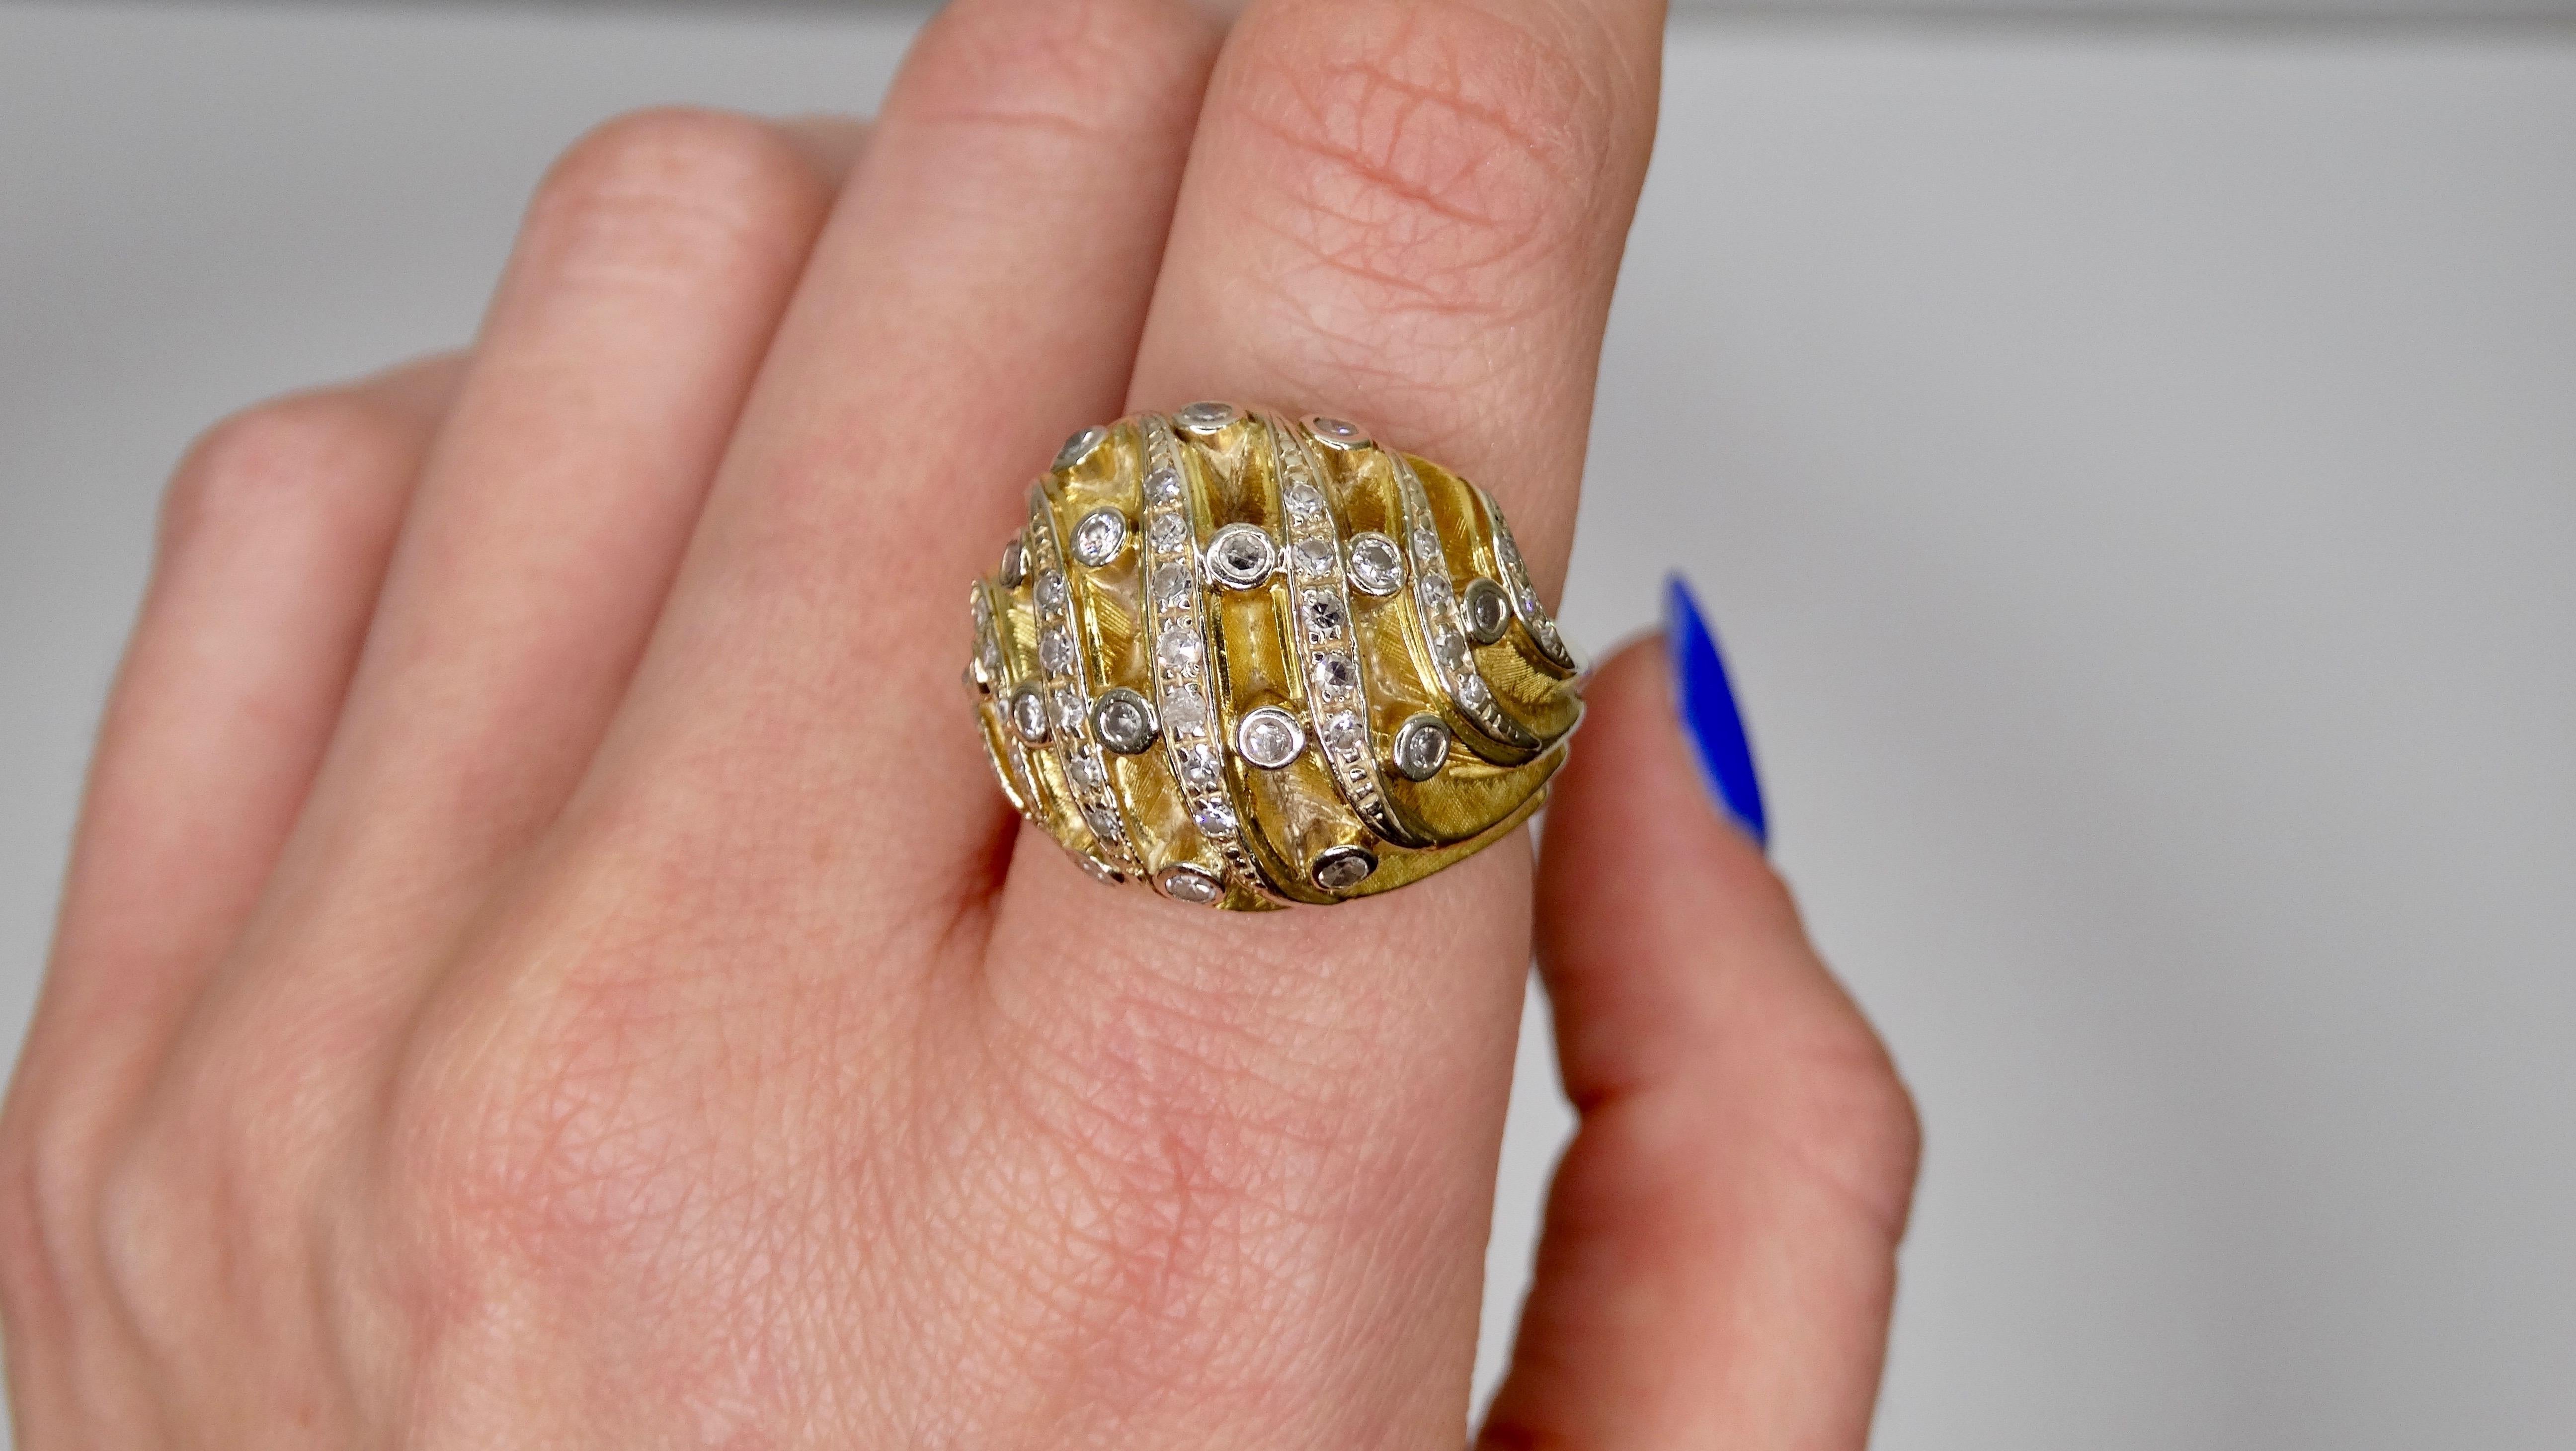 Add this stunning ring to your collection! Circa mid-20th century, this 14k Gold dome ring features asymmetrical rows of surface prong set Diamonds and flush/bezel set Diamonds. Ring weighs 12.26g total and was made to fit a size 6. Perfect to slip